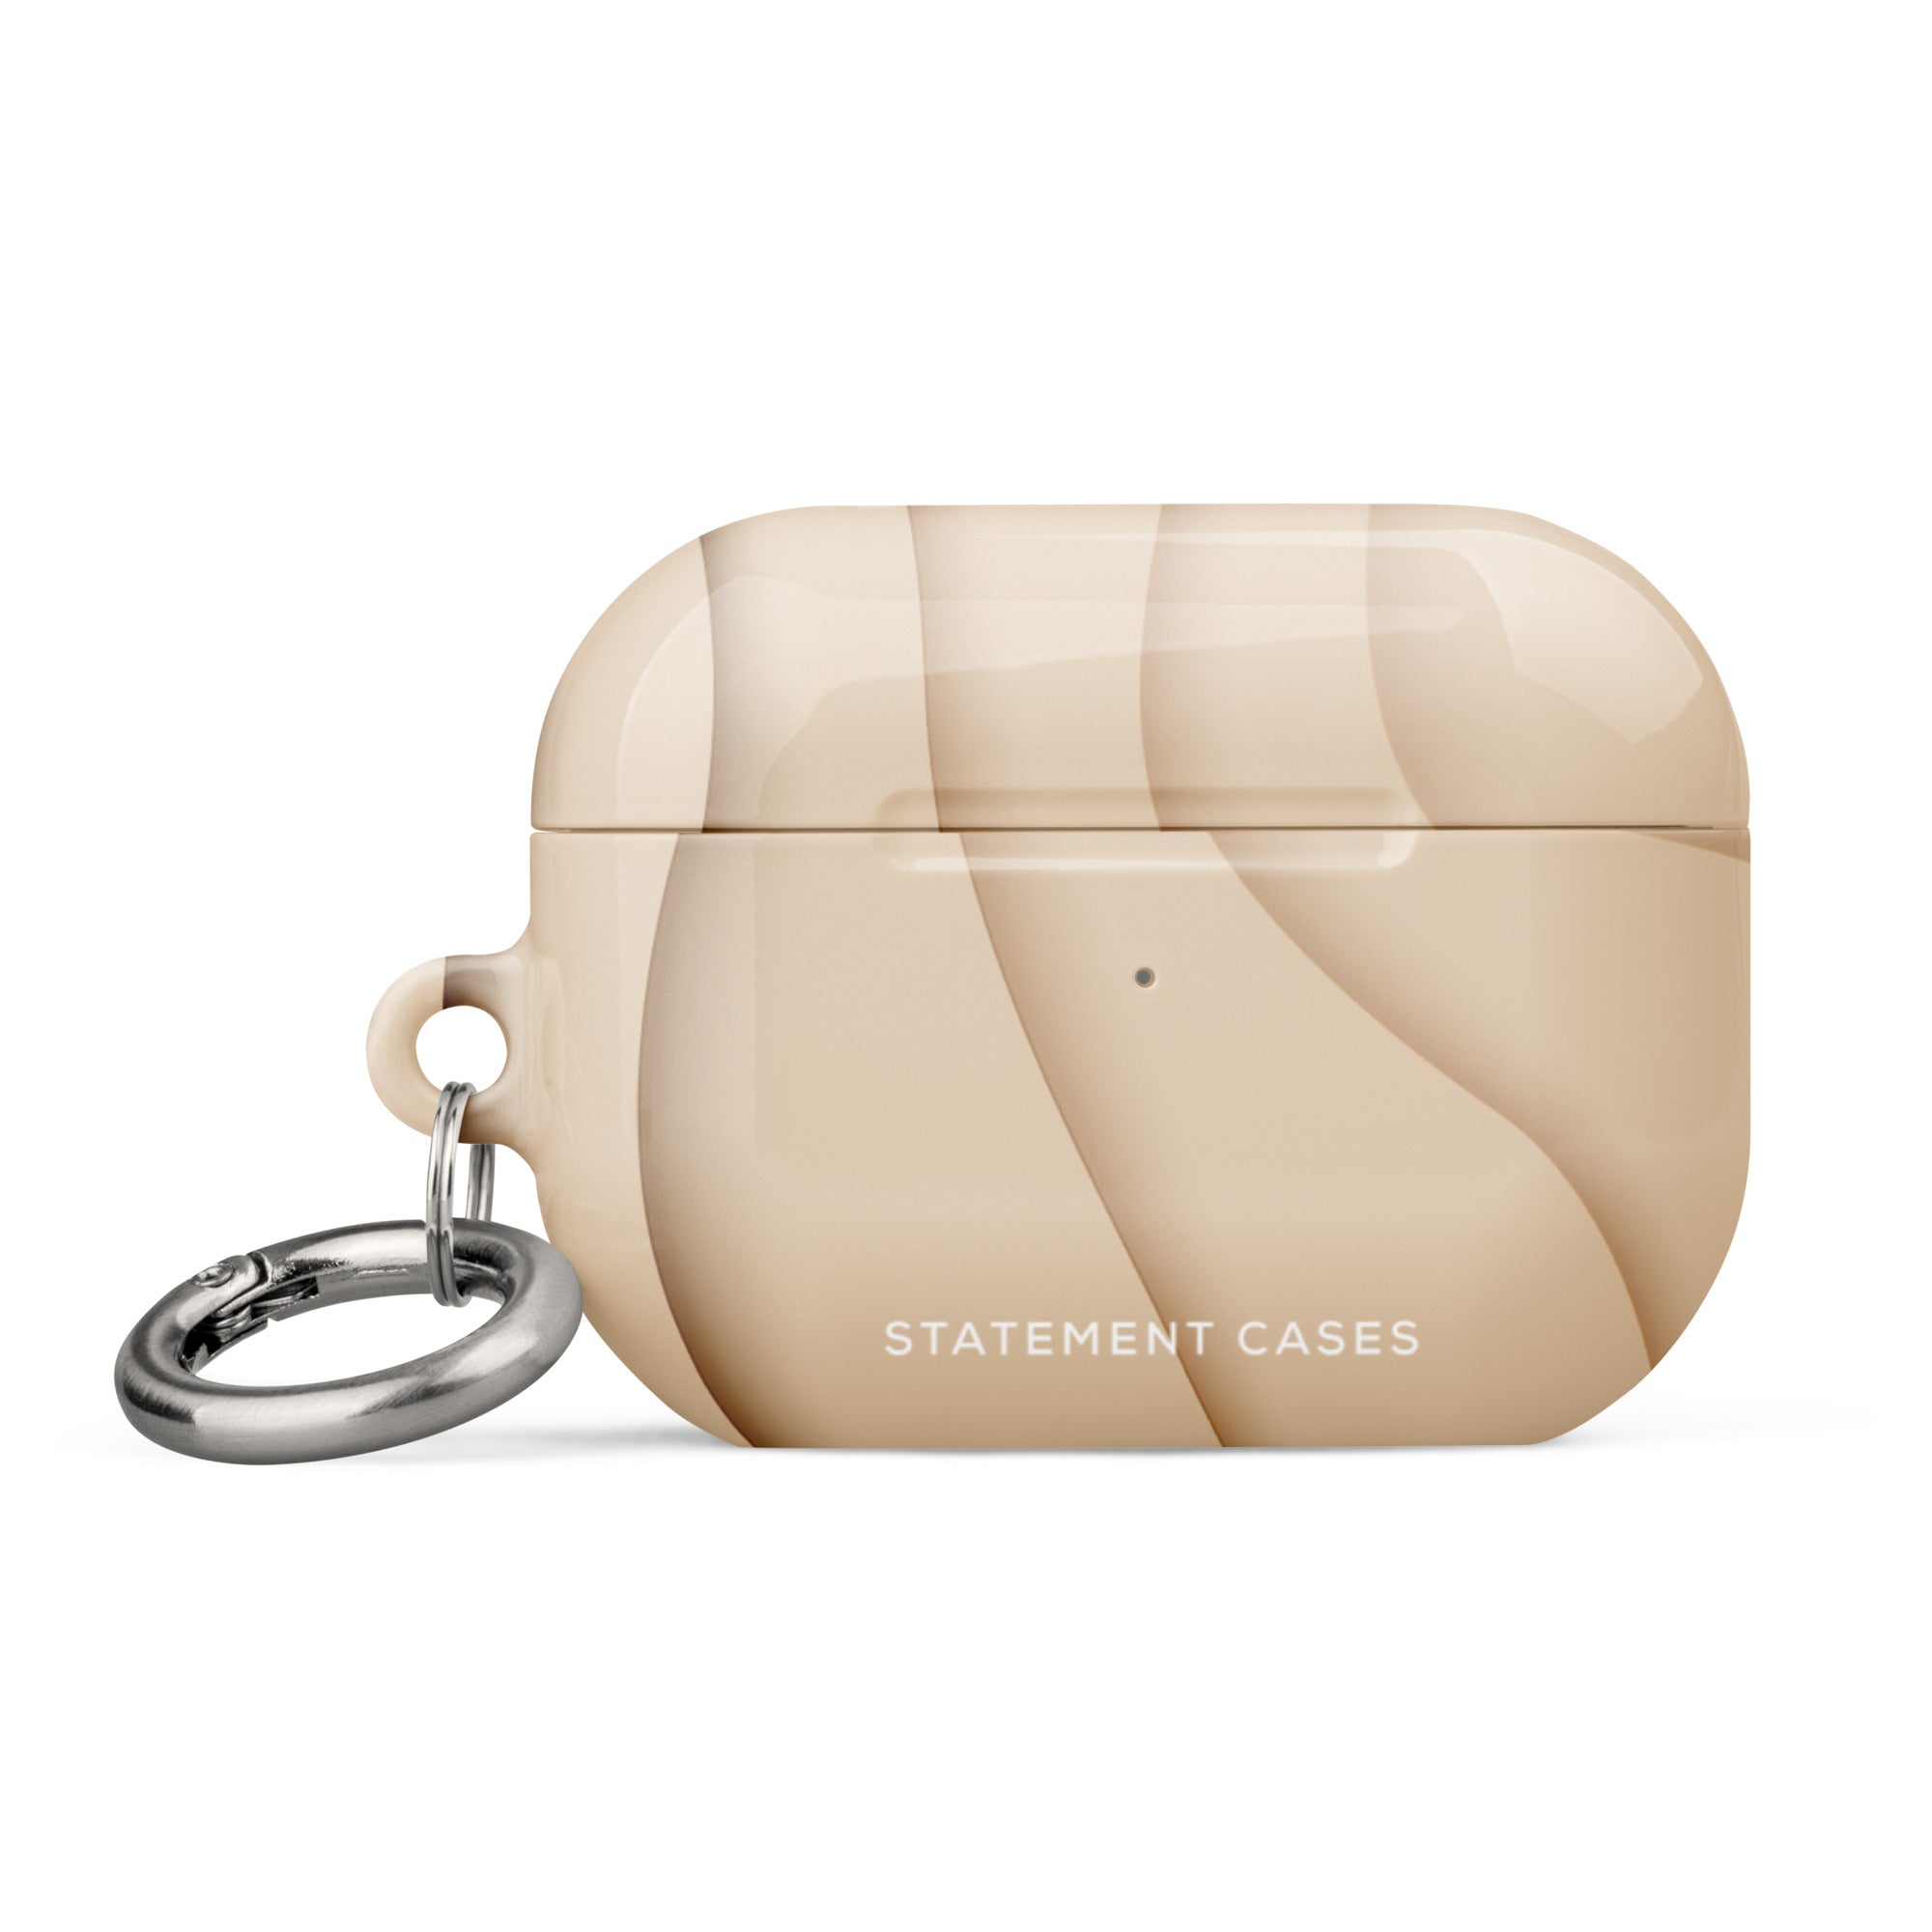 A beige Sandy Serenity for AirPods Pro Gen 2 with a sleek, glossy finish and marbled design. The impact-absorbing case has a small metal carabiner attached to the side for convenience. The text "Statement Cases" is printed on the front of the case in white letters.